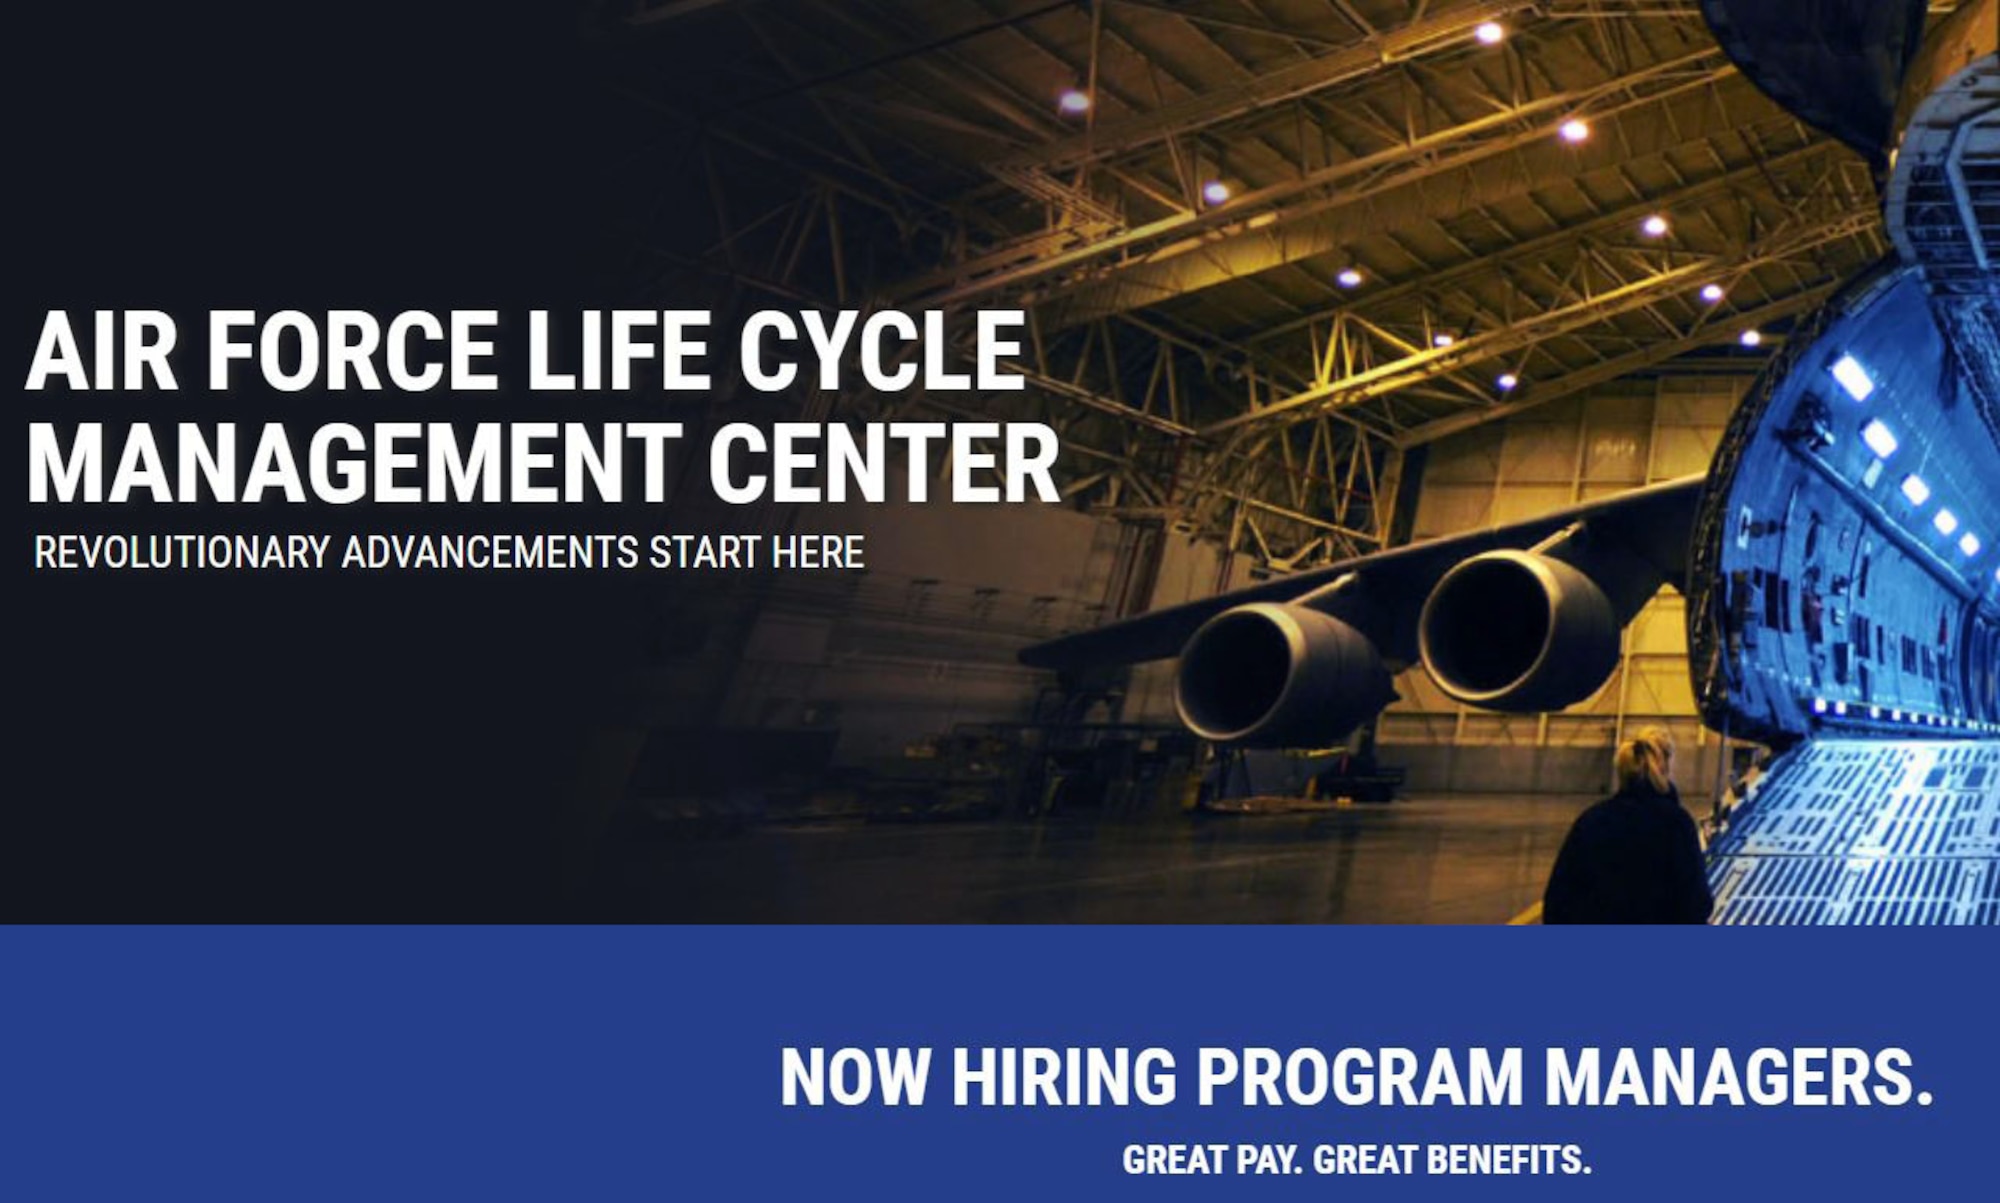 The Air Force Life Cycle Management Center is seeking to fill multiple program manager positions in both the Digital and Command, Control, Communications, Intelligence and Networks Directorates. Applicants must submit resumes by 11:59 p.m. EST on Sept. 9 at https://afciviliancareers.com/aflcmc/.